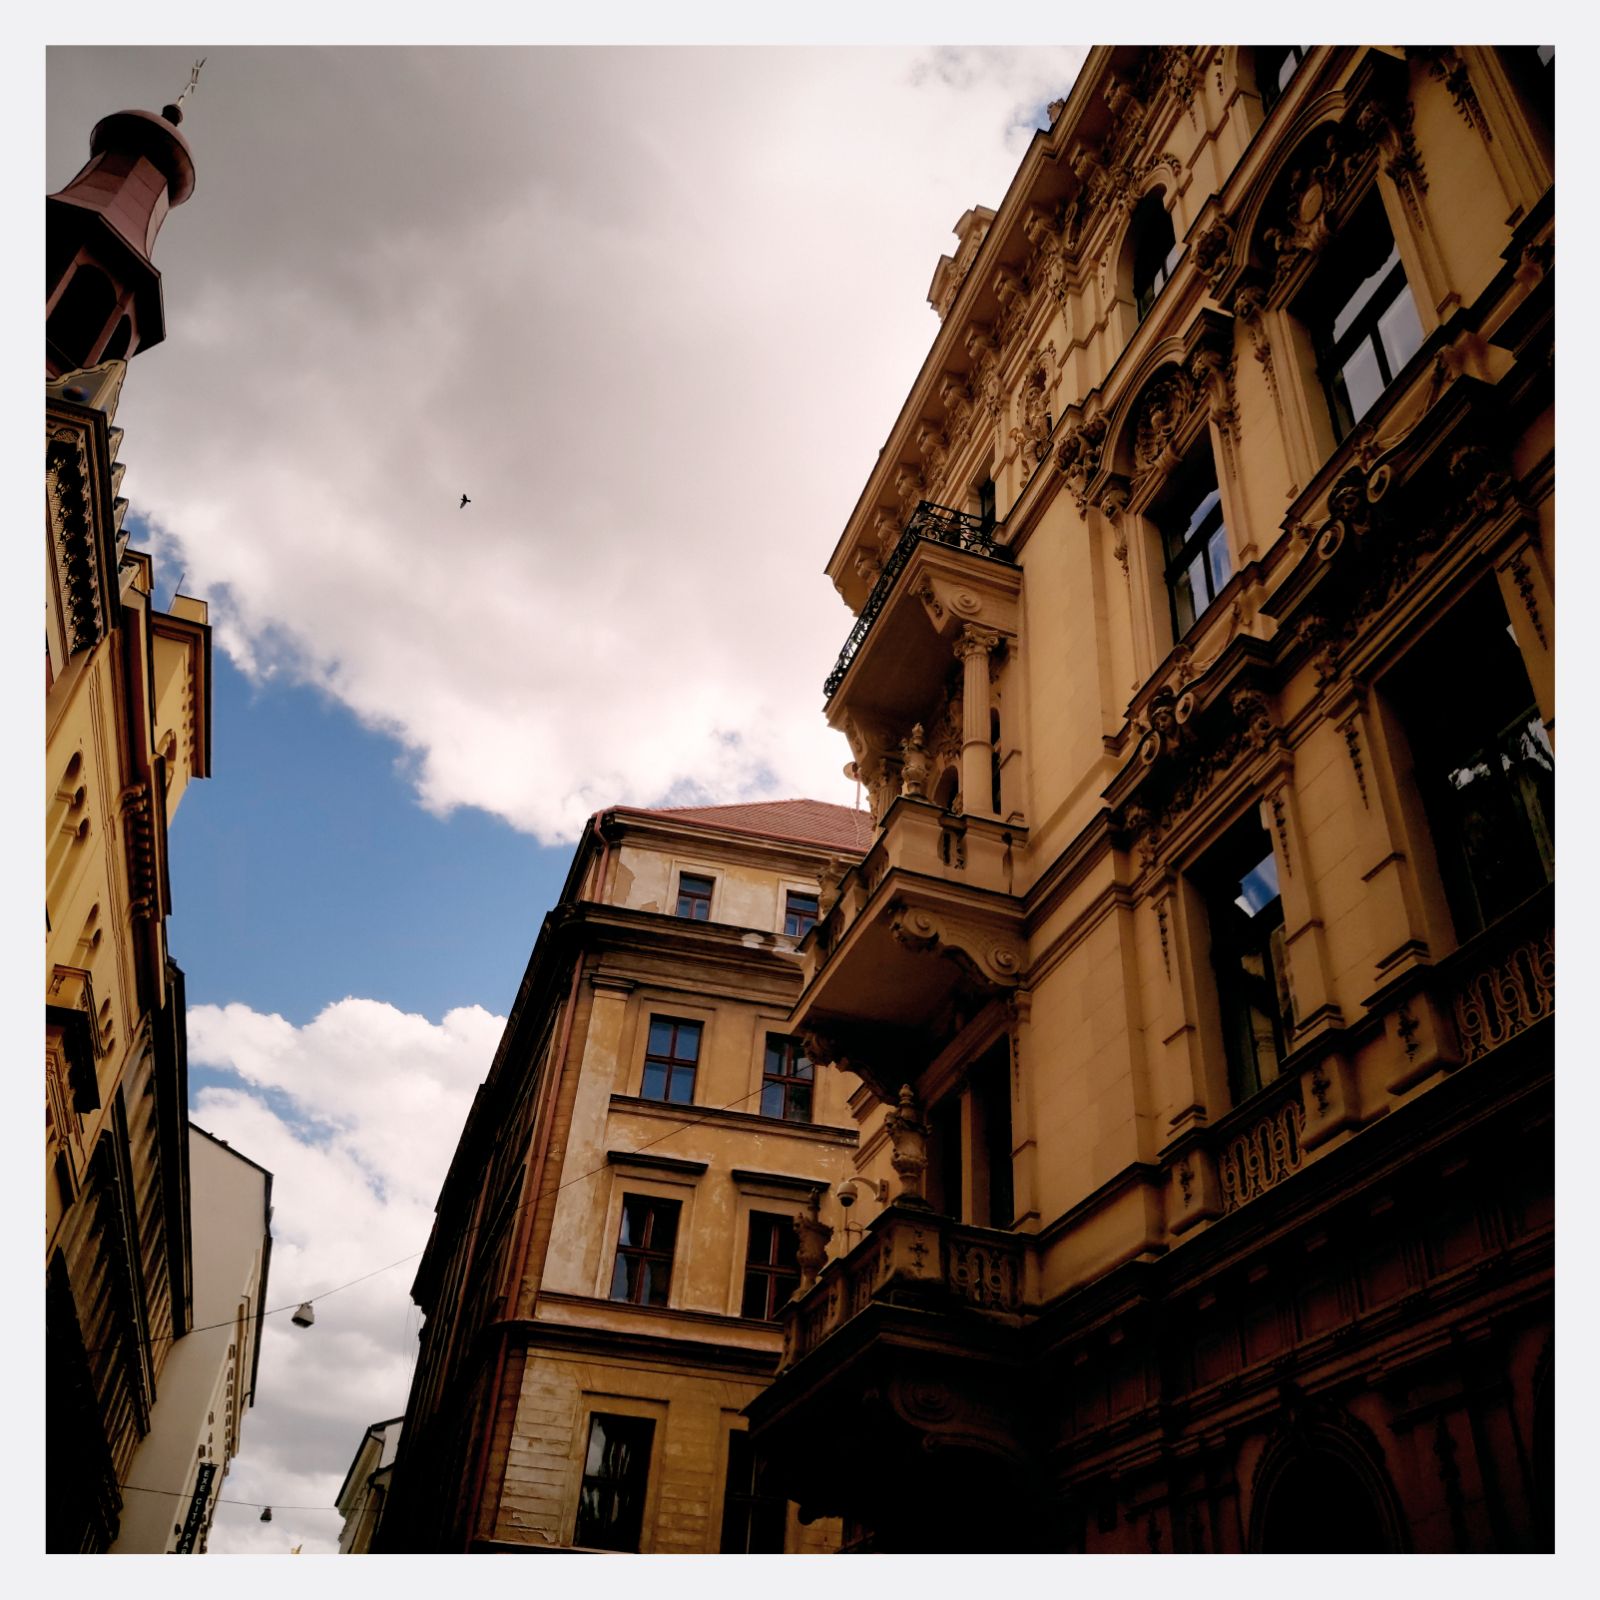 Old building, yellow facade and blue sky.